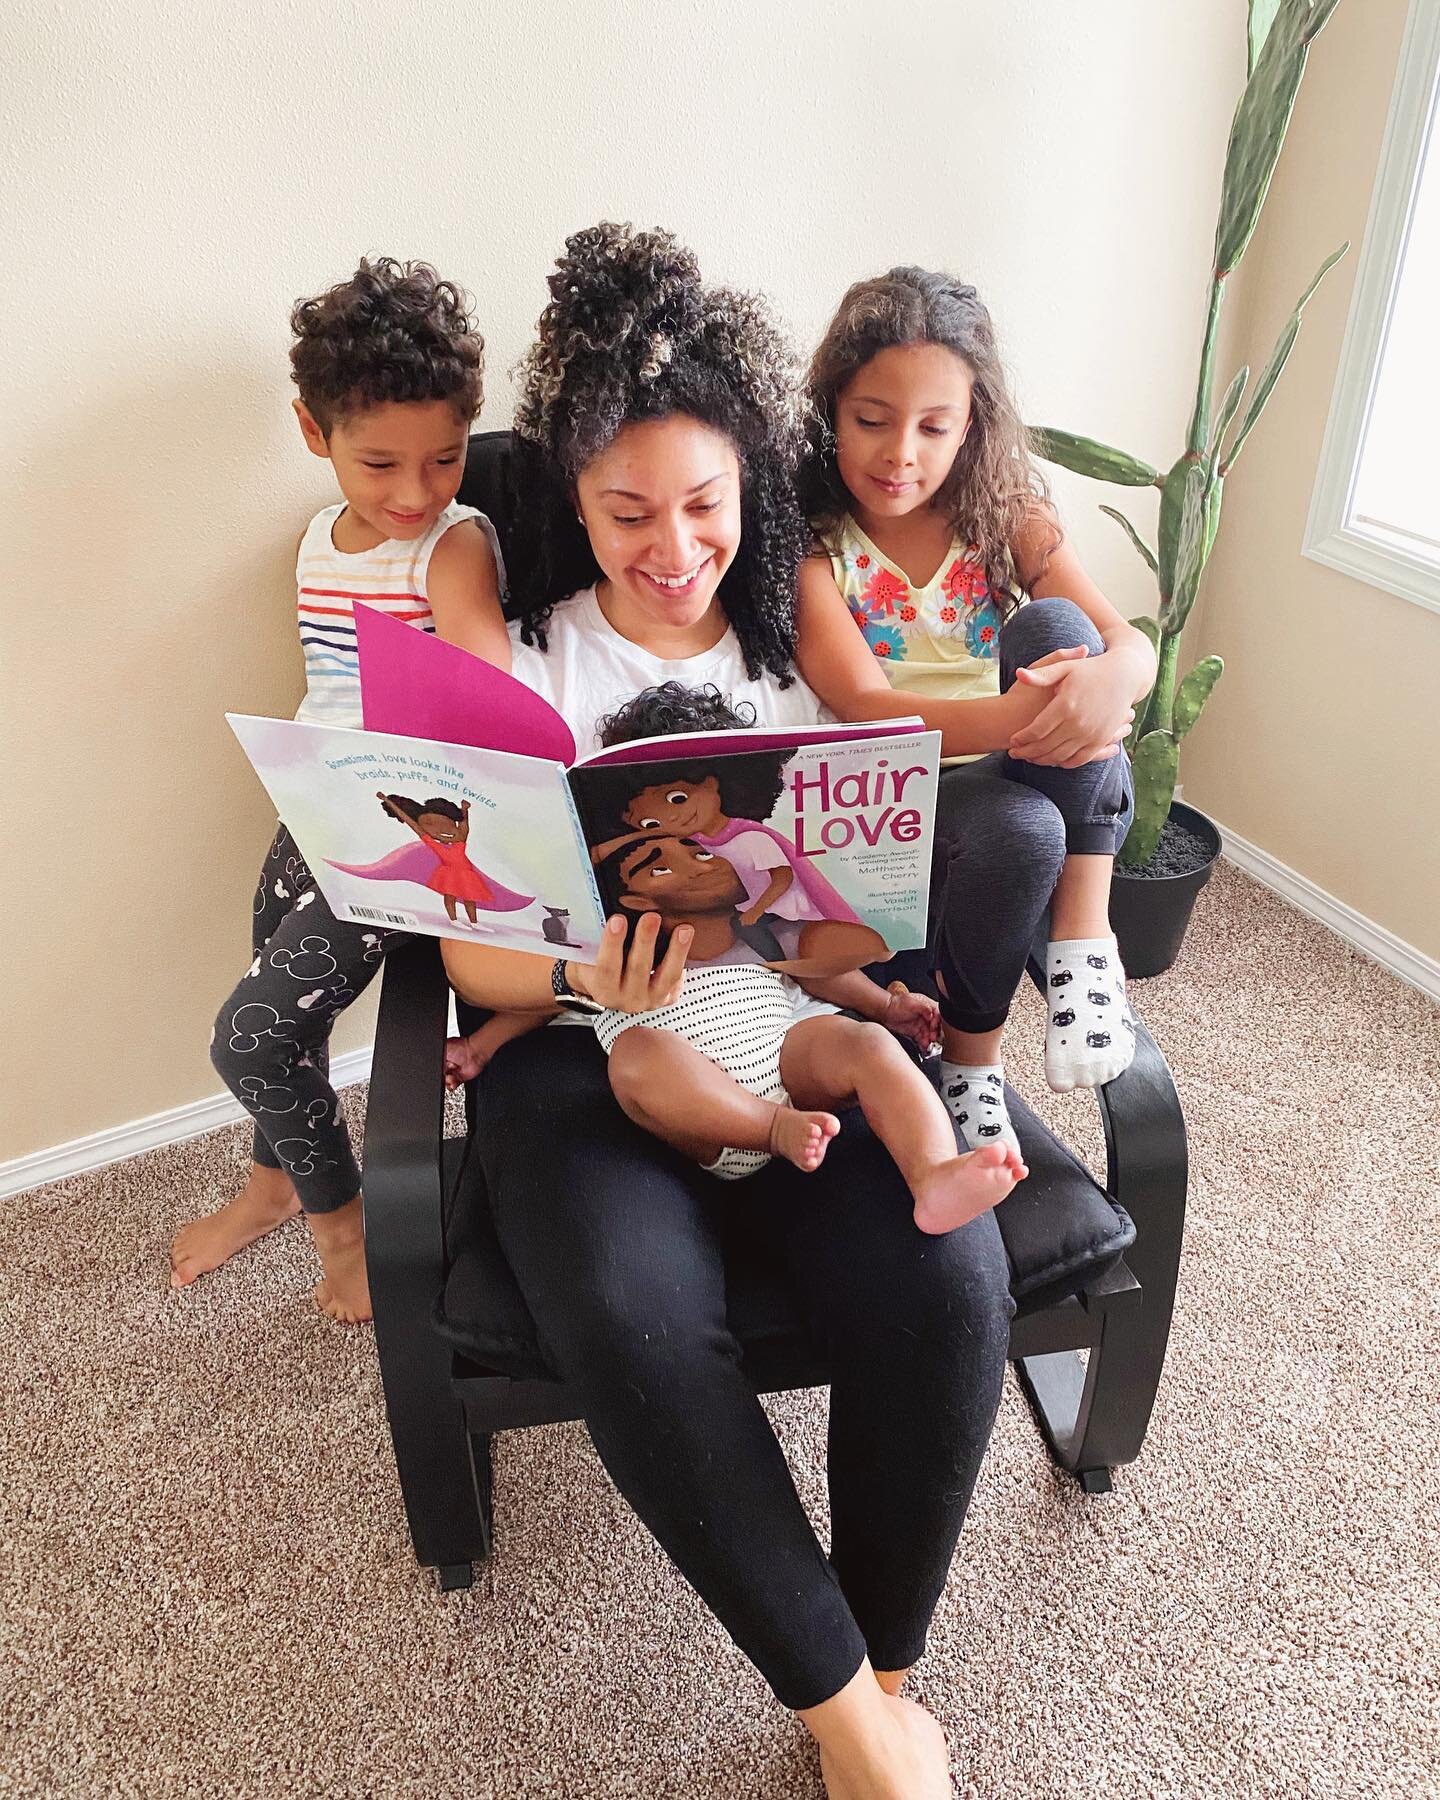 When I heard it was #nationalafroday I had to get out my favorite book and read it to my babies. ⠀
⠀
For 12 years (against my poor mothers protests) I chemically relaxed and straightened my hair. I was always hiding my hair, because growing up, it wa